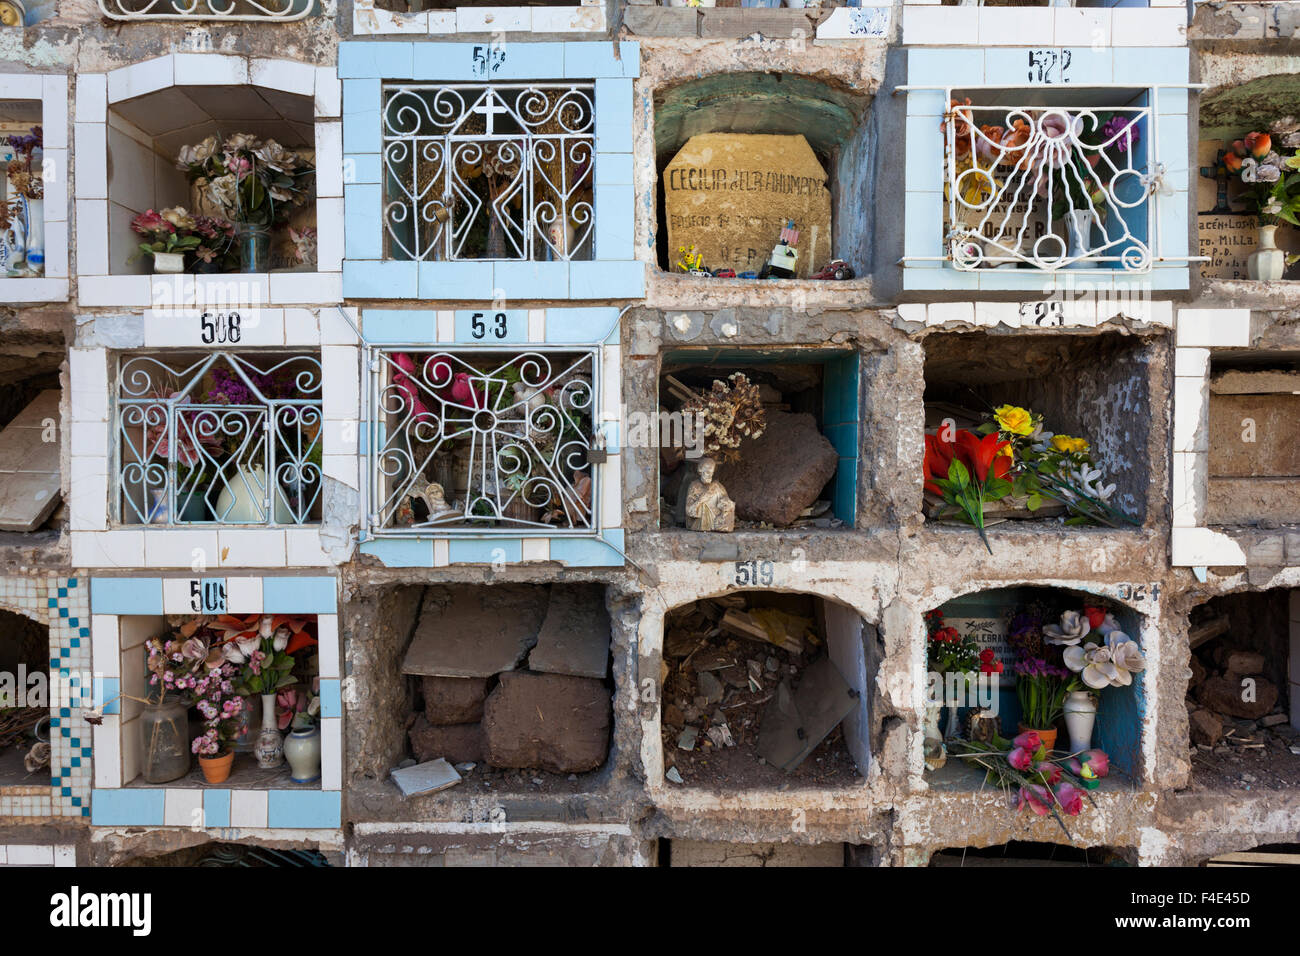 Chile, Andacollo, town cemetery. Stock Photo